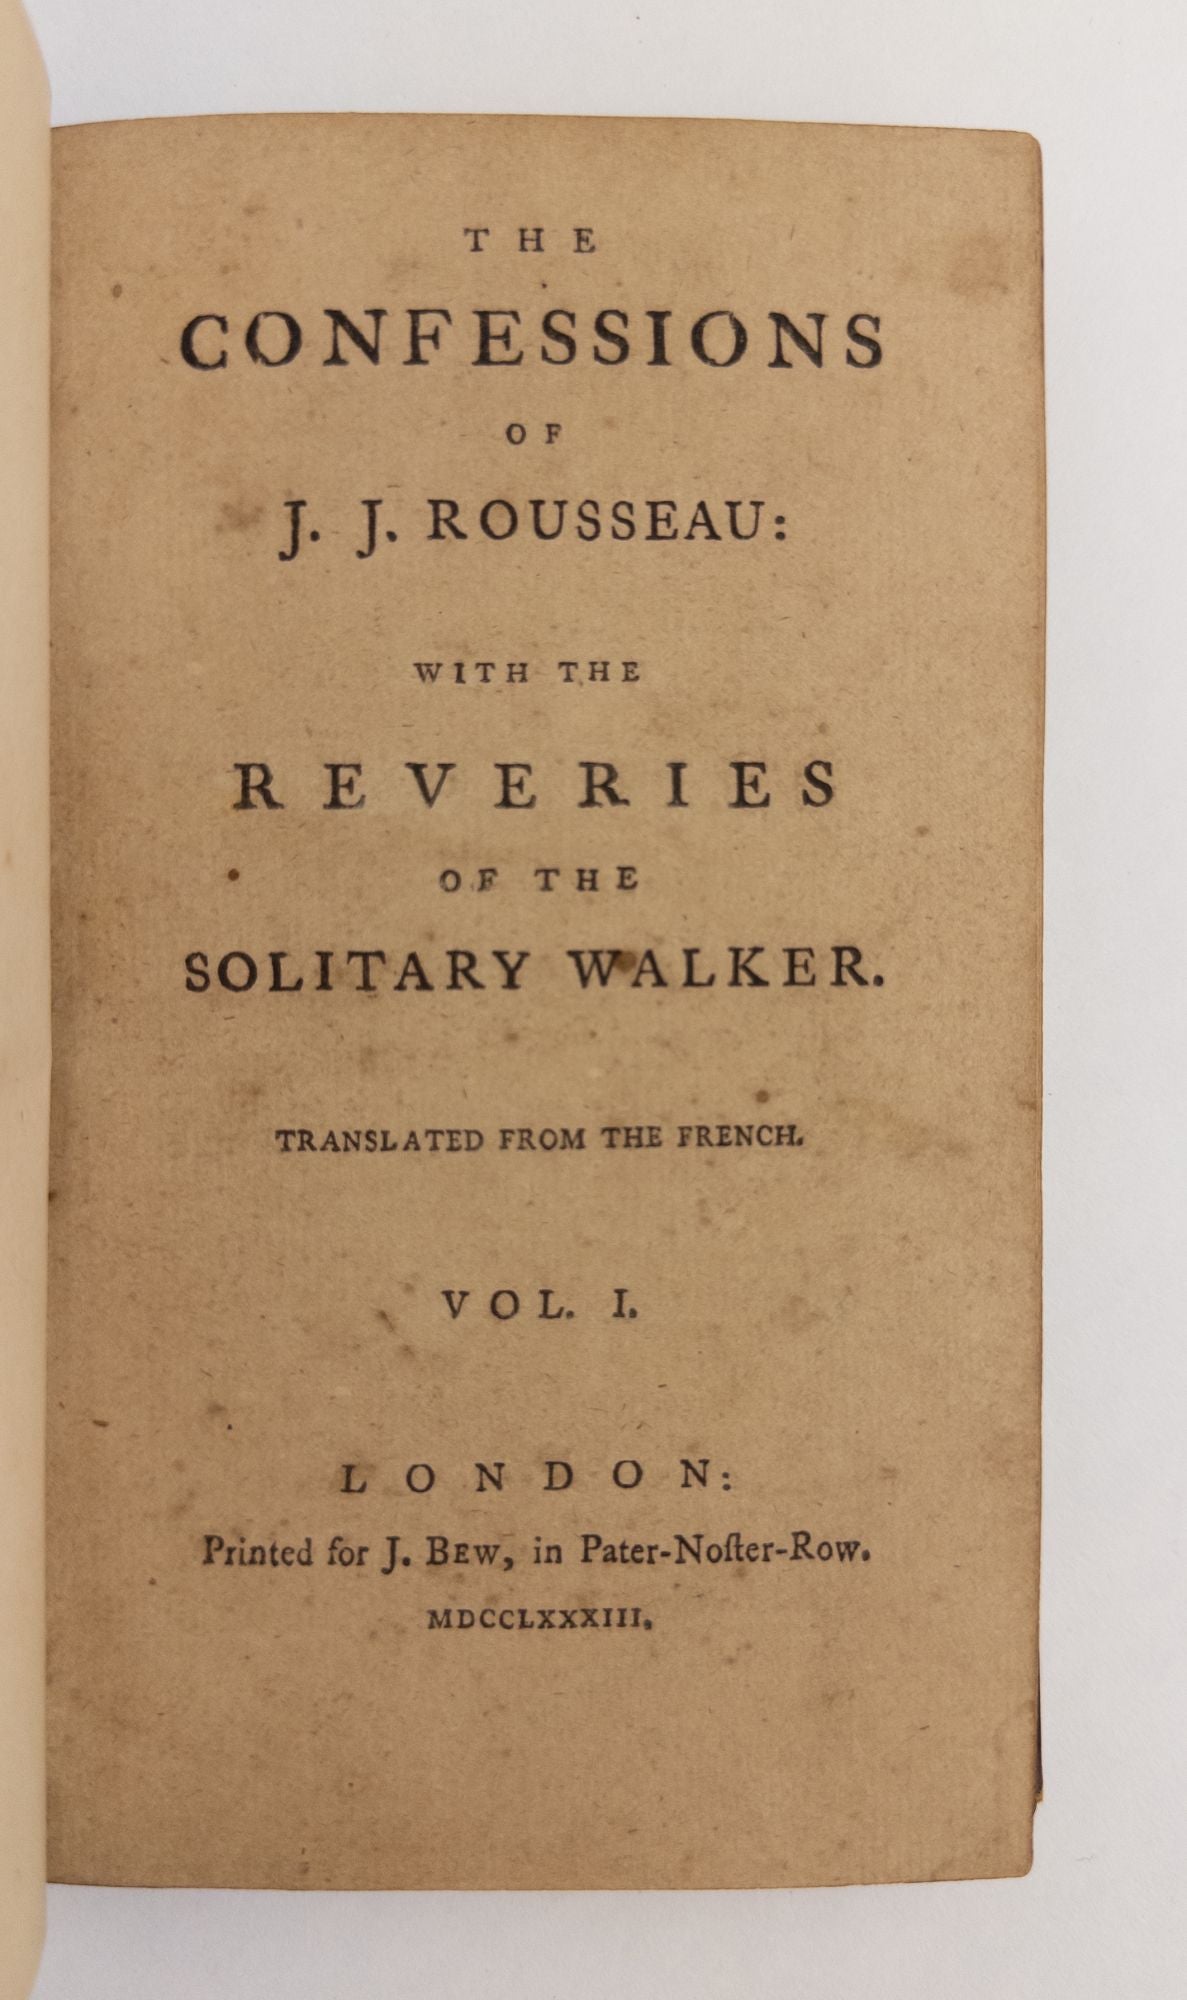 Product Image for The Confessions of J. J. Rousseau: With The Reveries of a Solitary Walker [Two volumes]